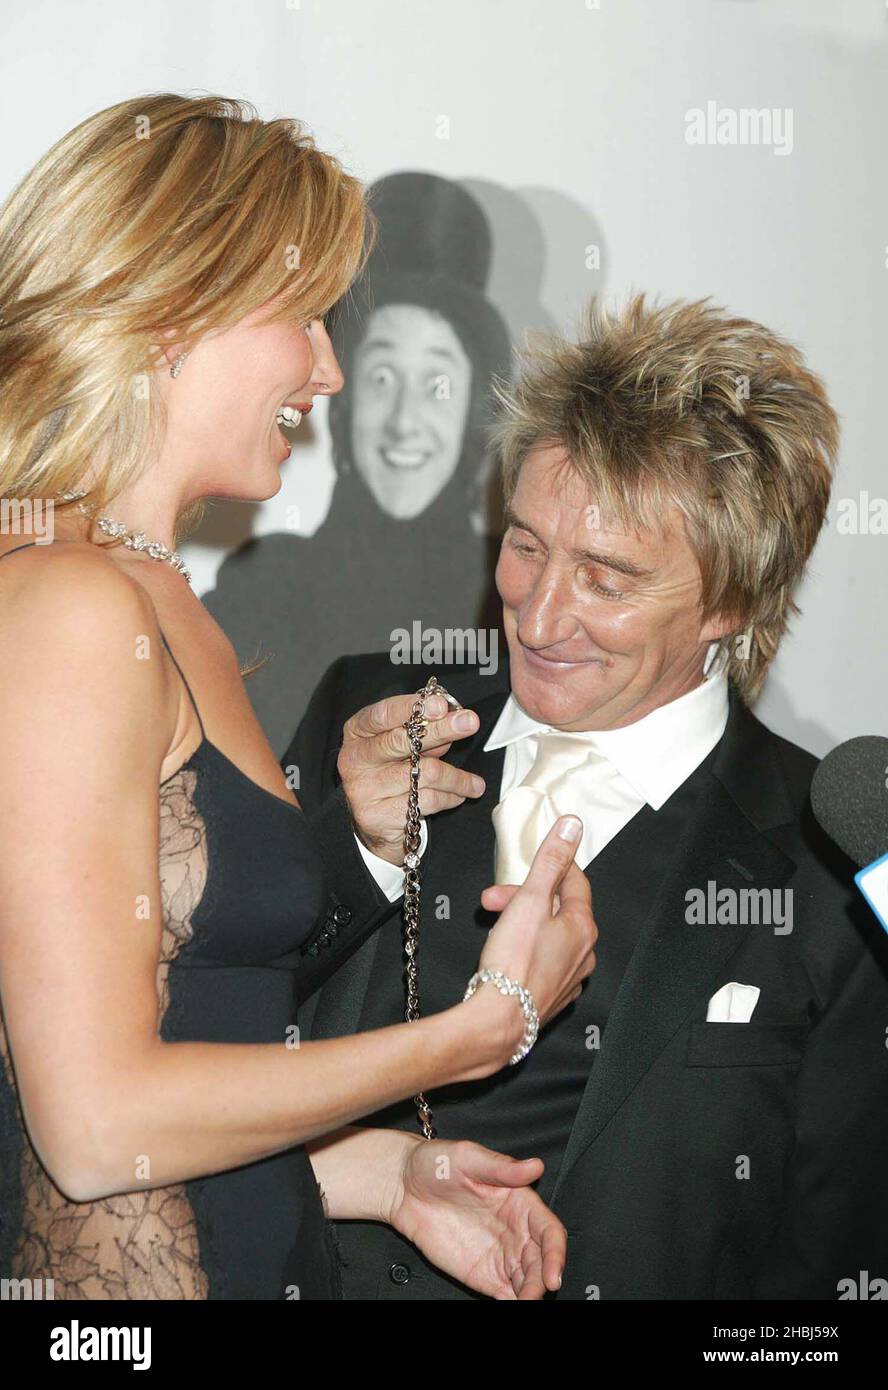 Penny Lancaster and Rod Stewart at the Music Industry Awards at the Grosvenor House Hotel in London. Stock Photo